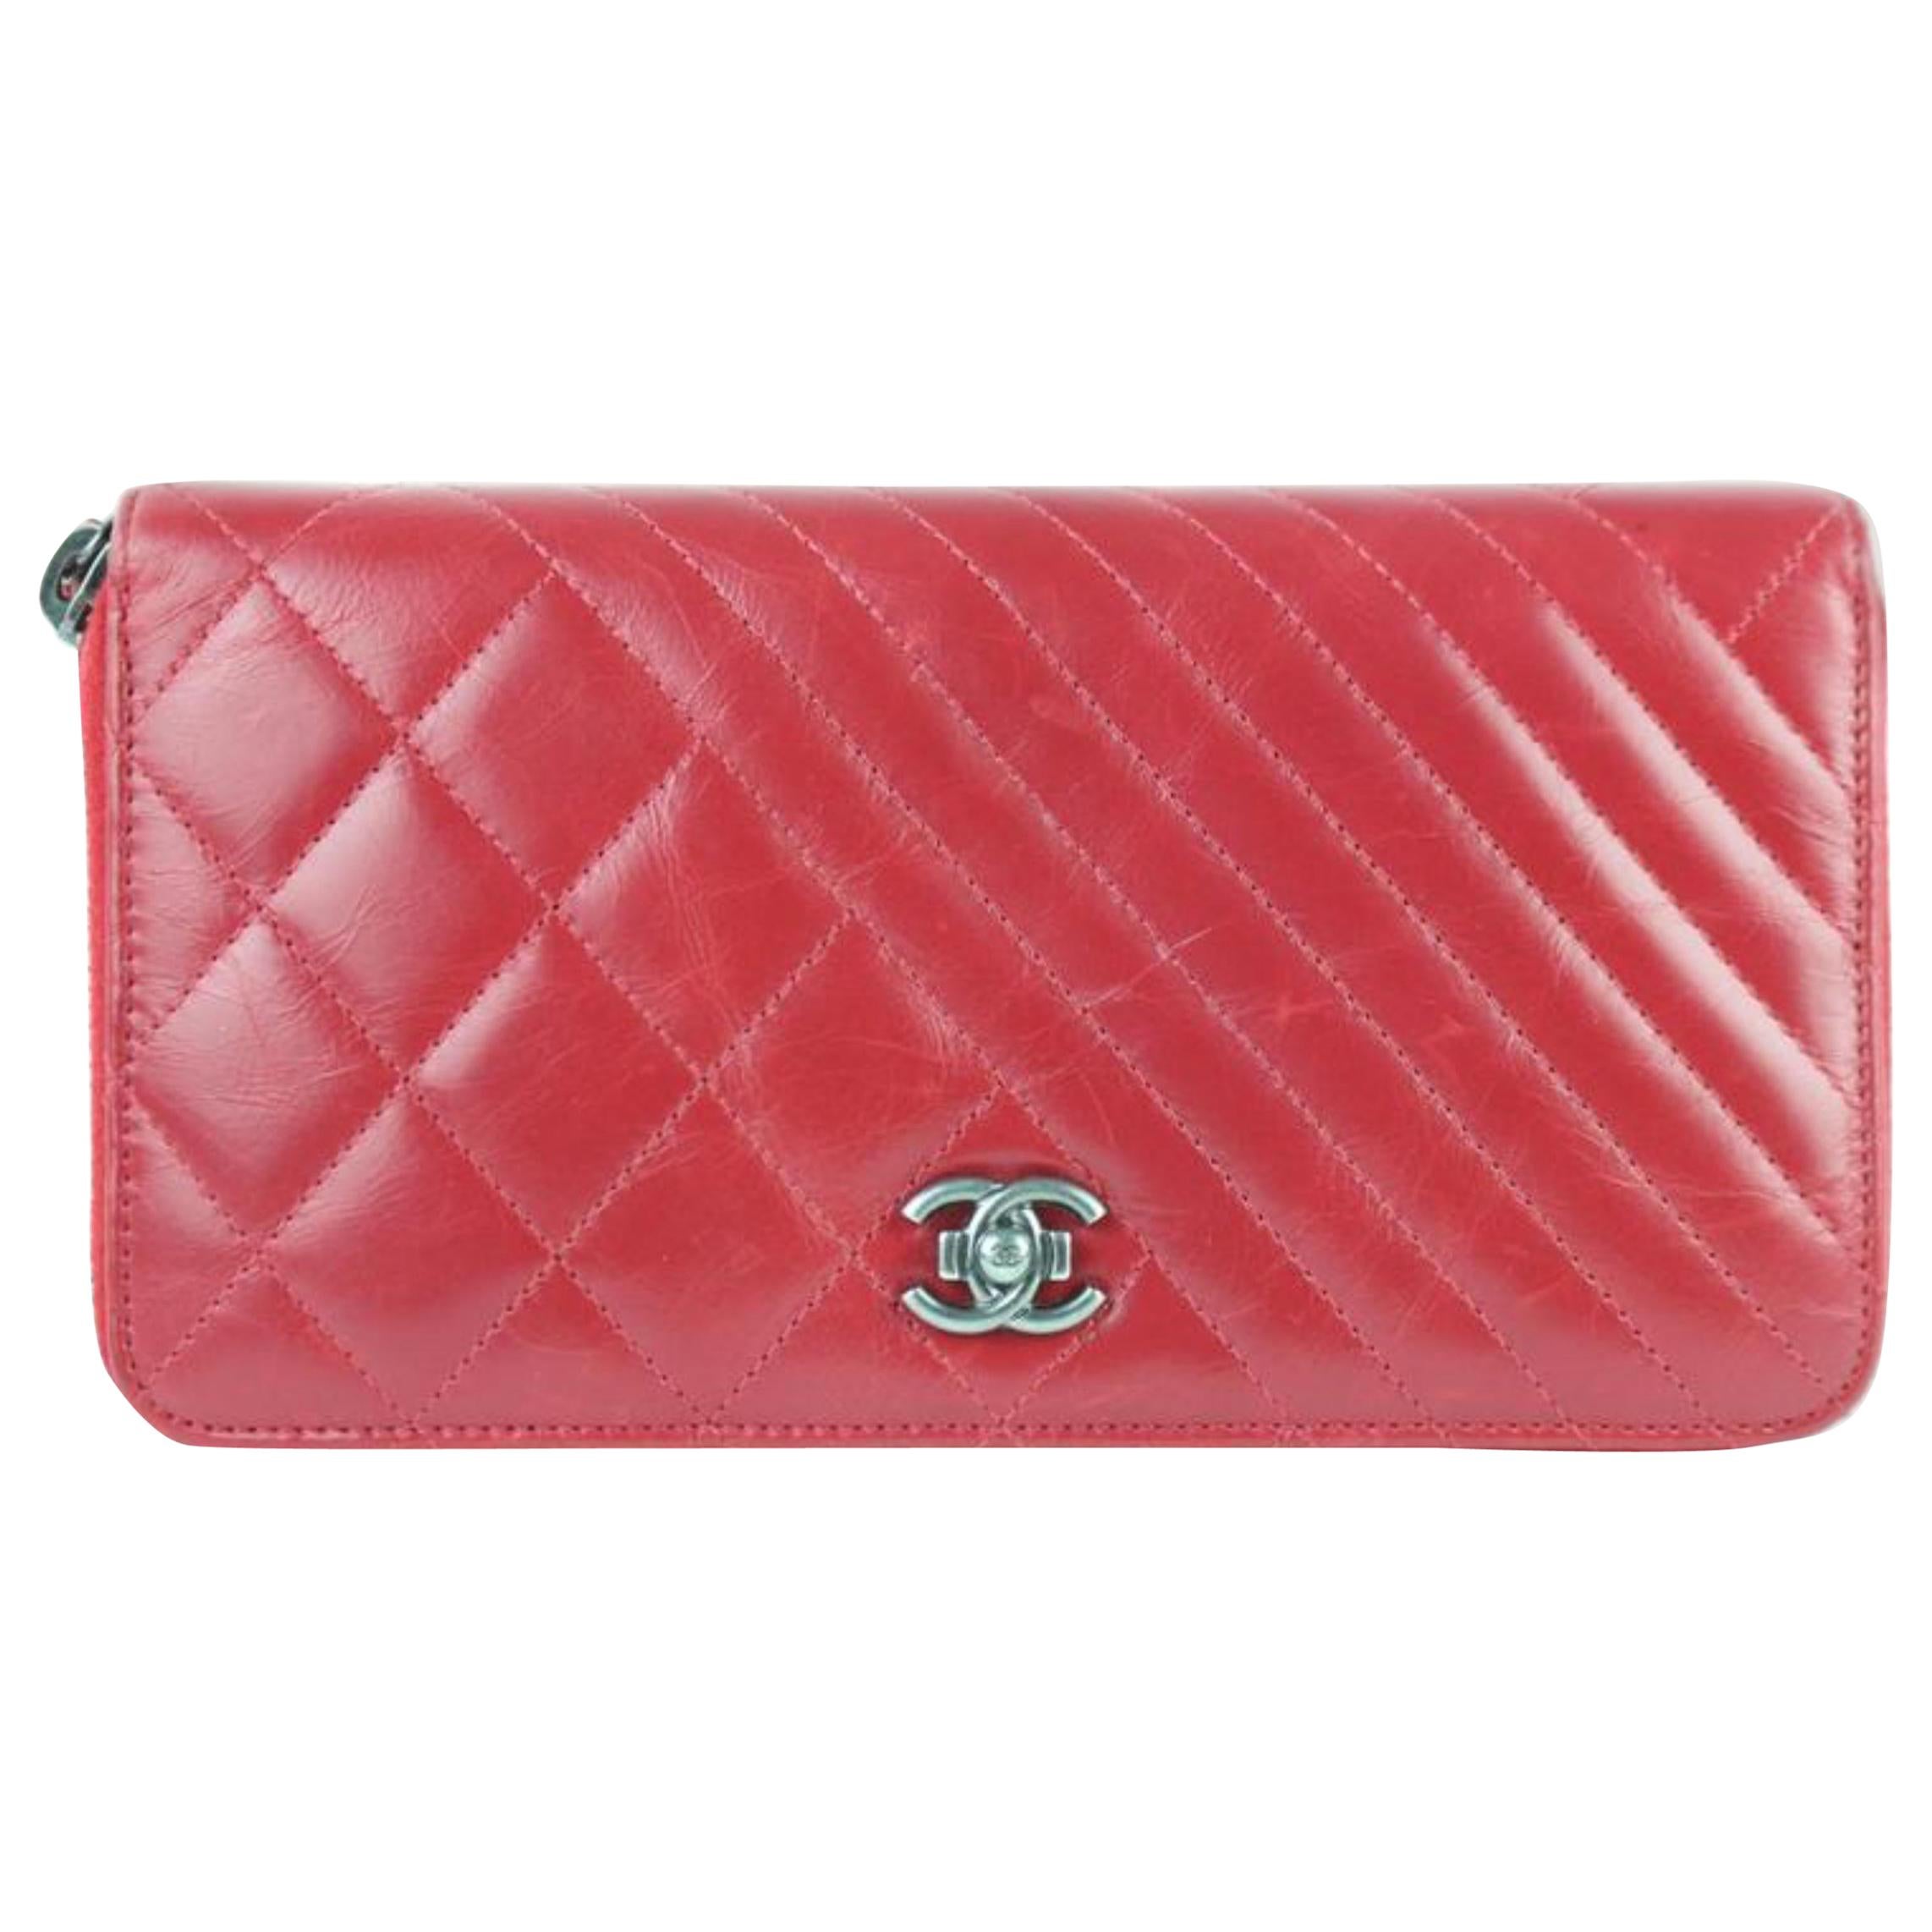 Chanel Zippy Boy Chevron Mix Quilted Zip Around Gusset Wallet 9ce0102 Red clutch For Sale